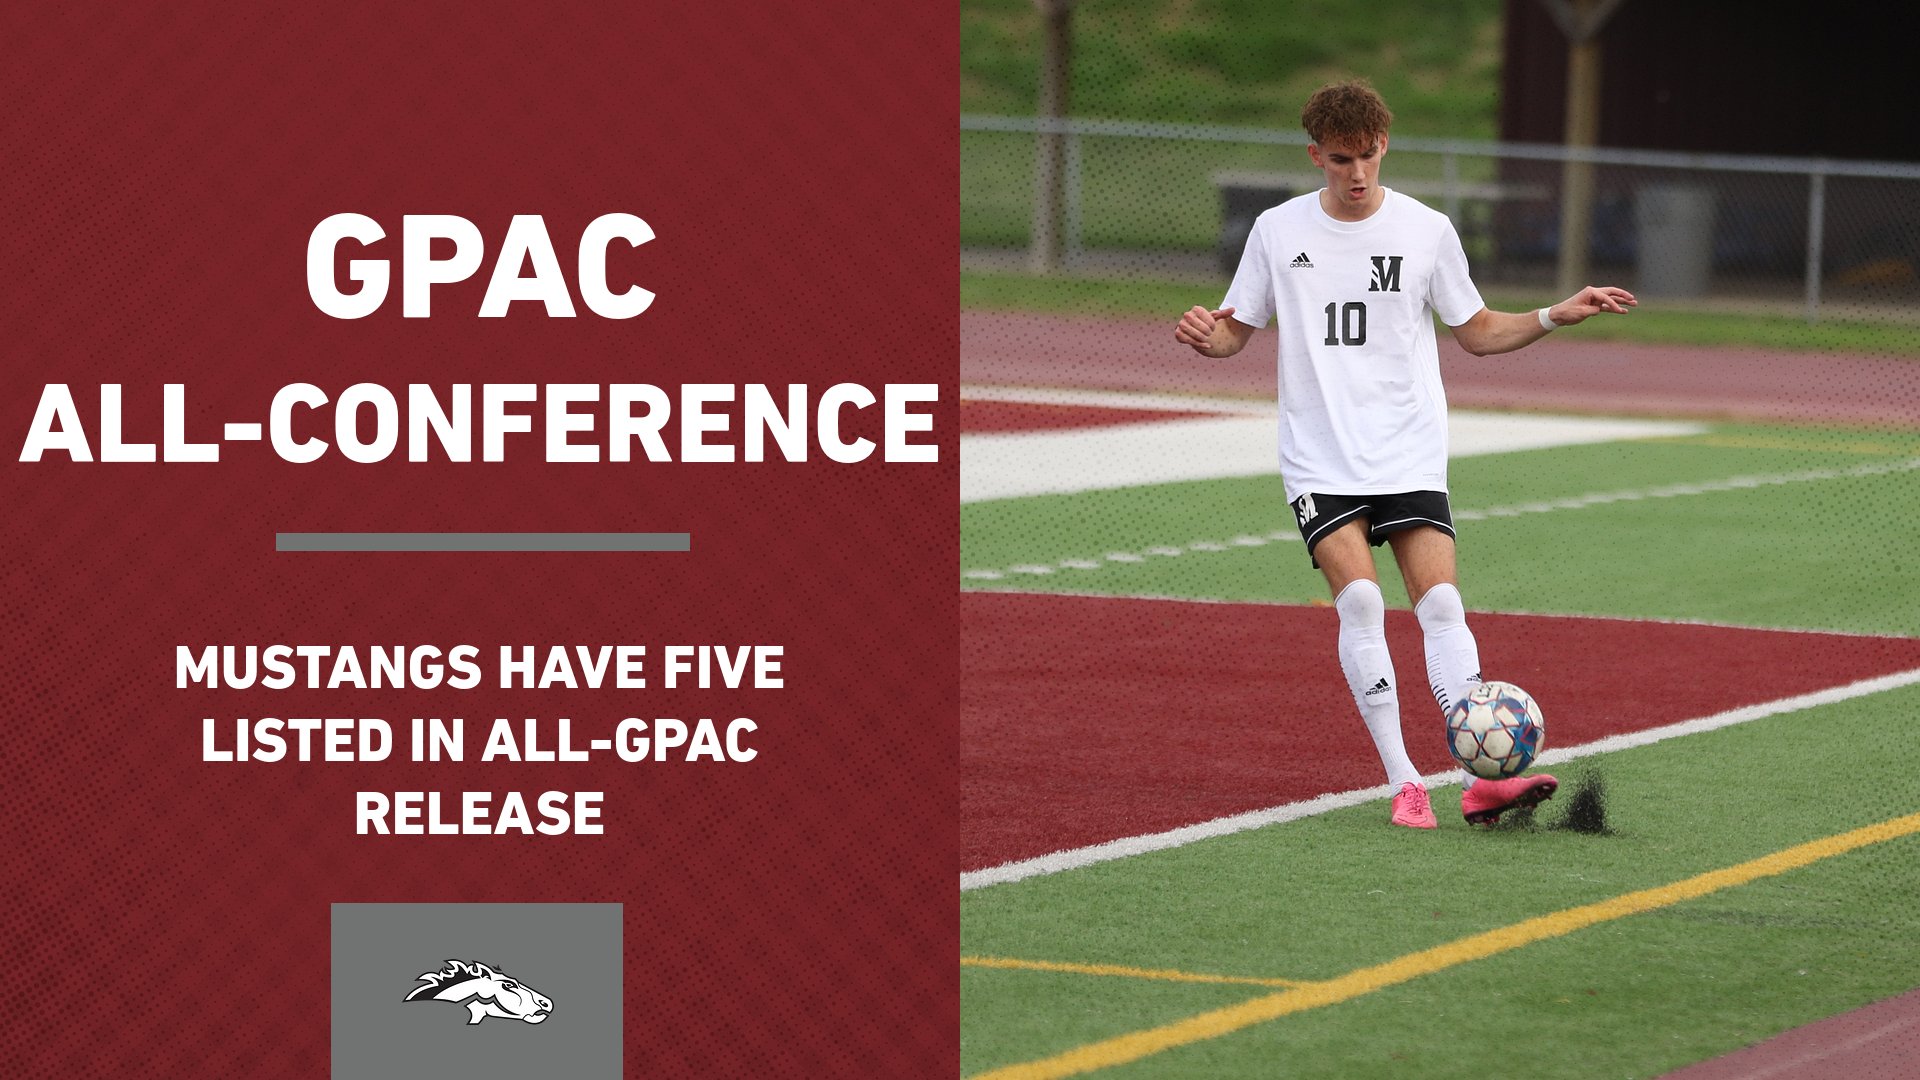 Men's Soccer All-Conference release features five Mustangs